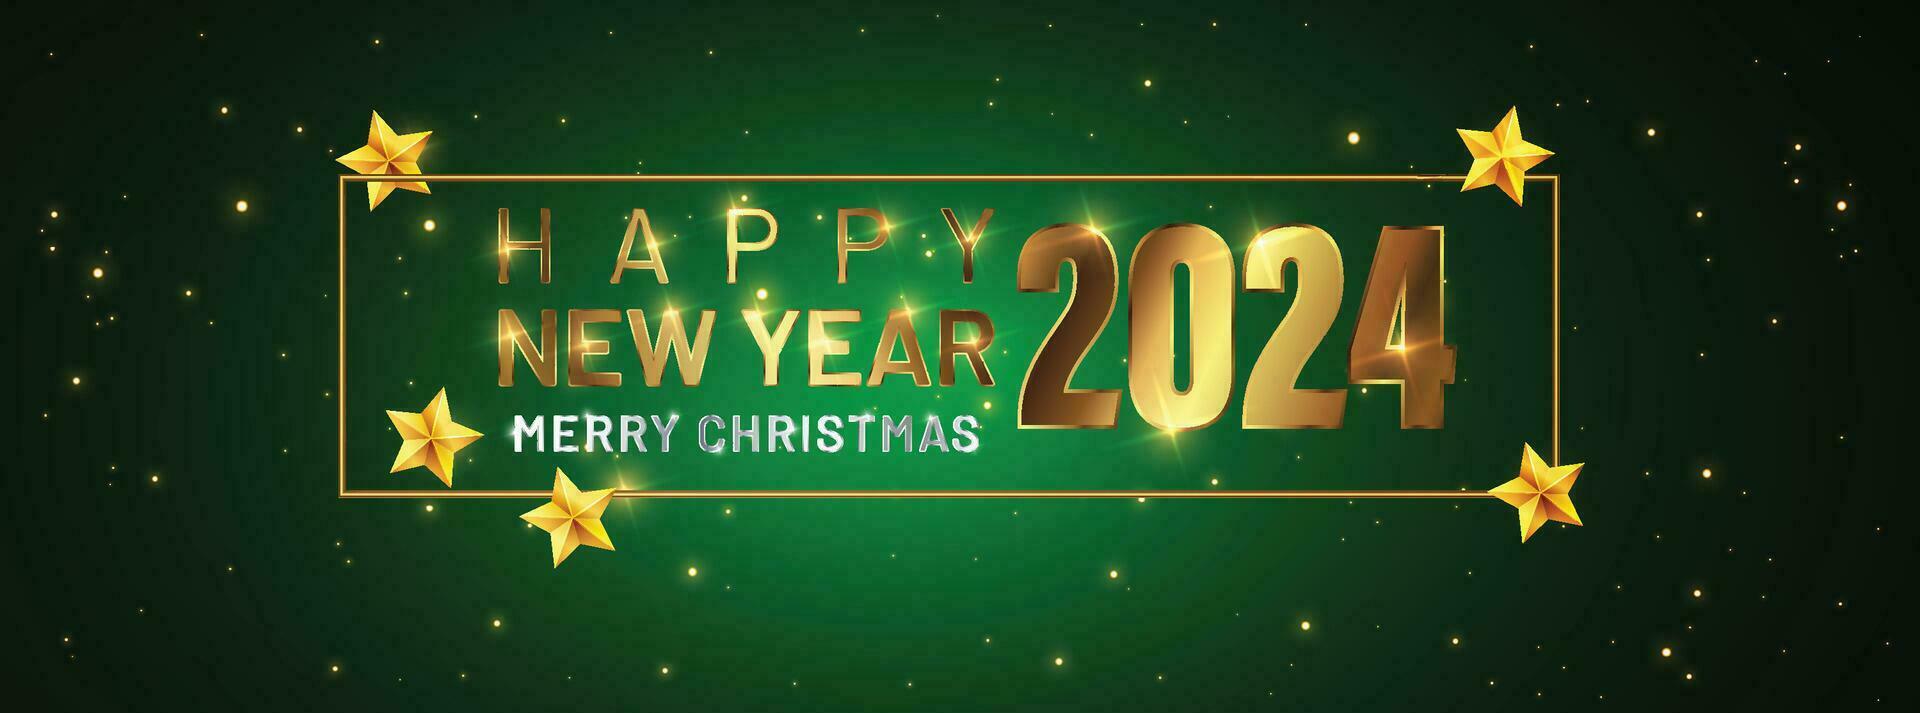 Happy New Year of glitter gold fireworks. Vector golden glittering text and 2024 numbers with sparkle shine for holiday greeting card.